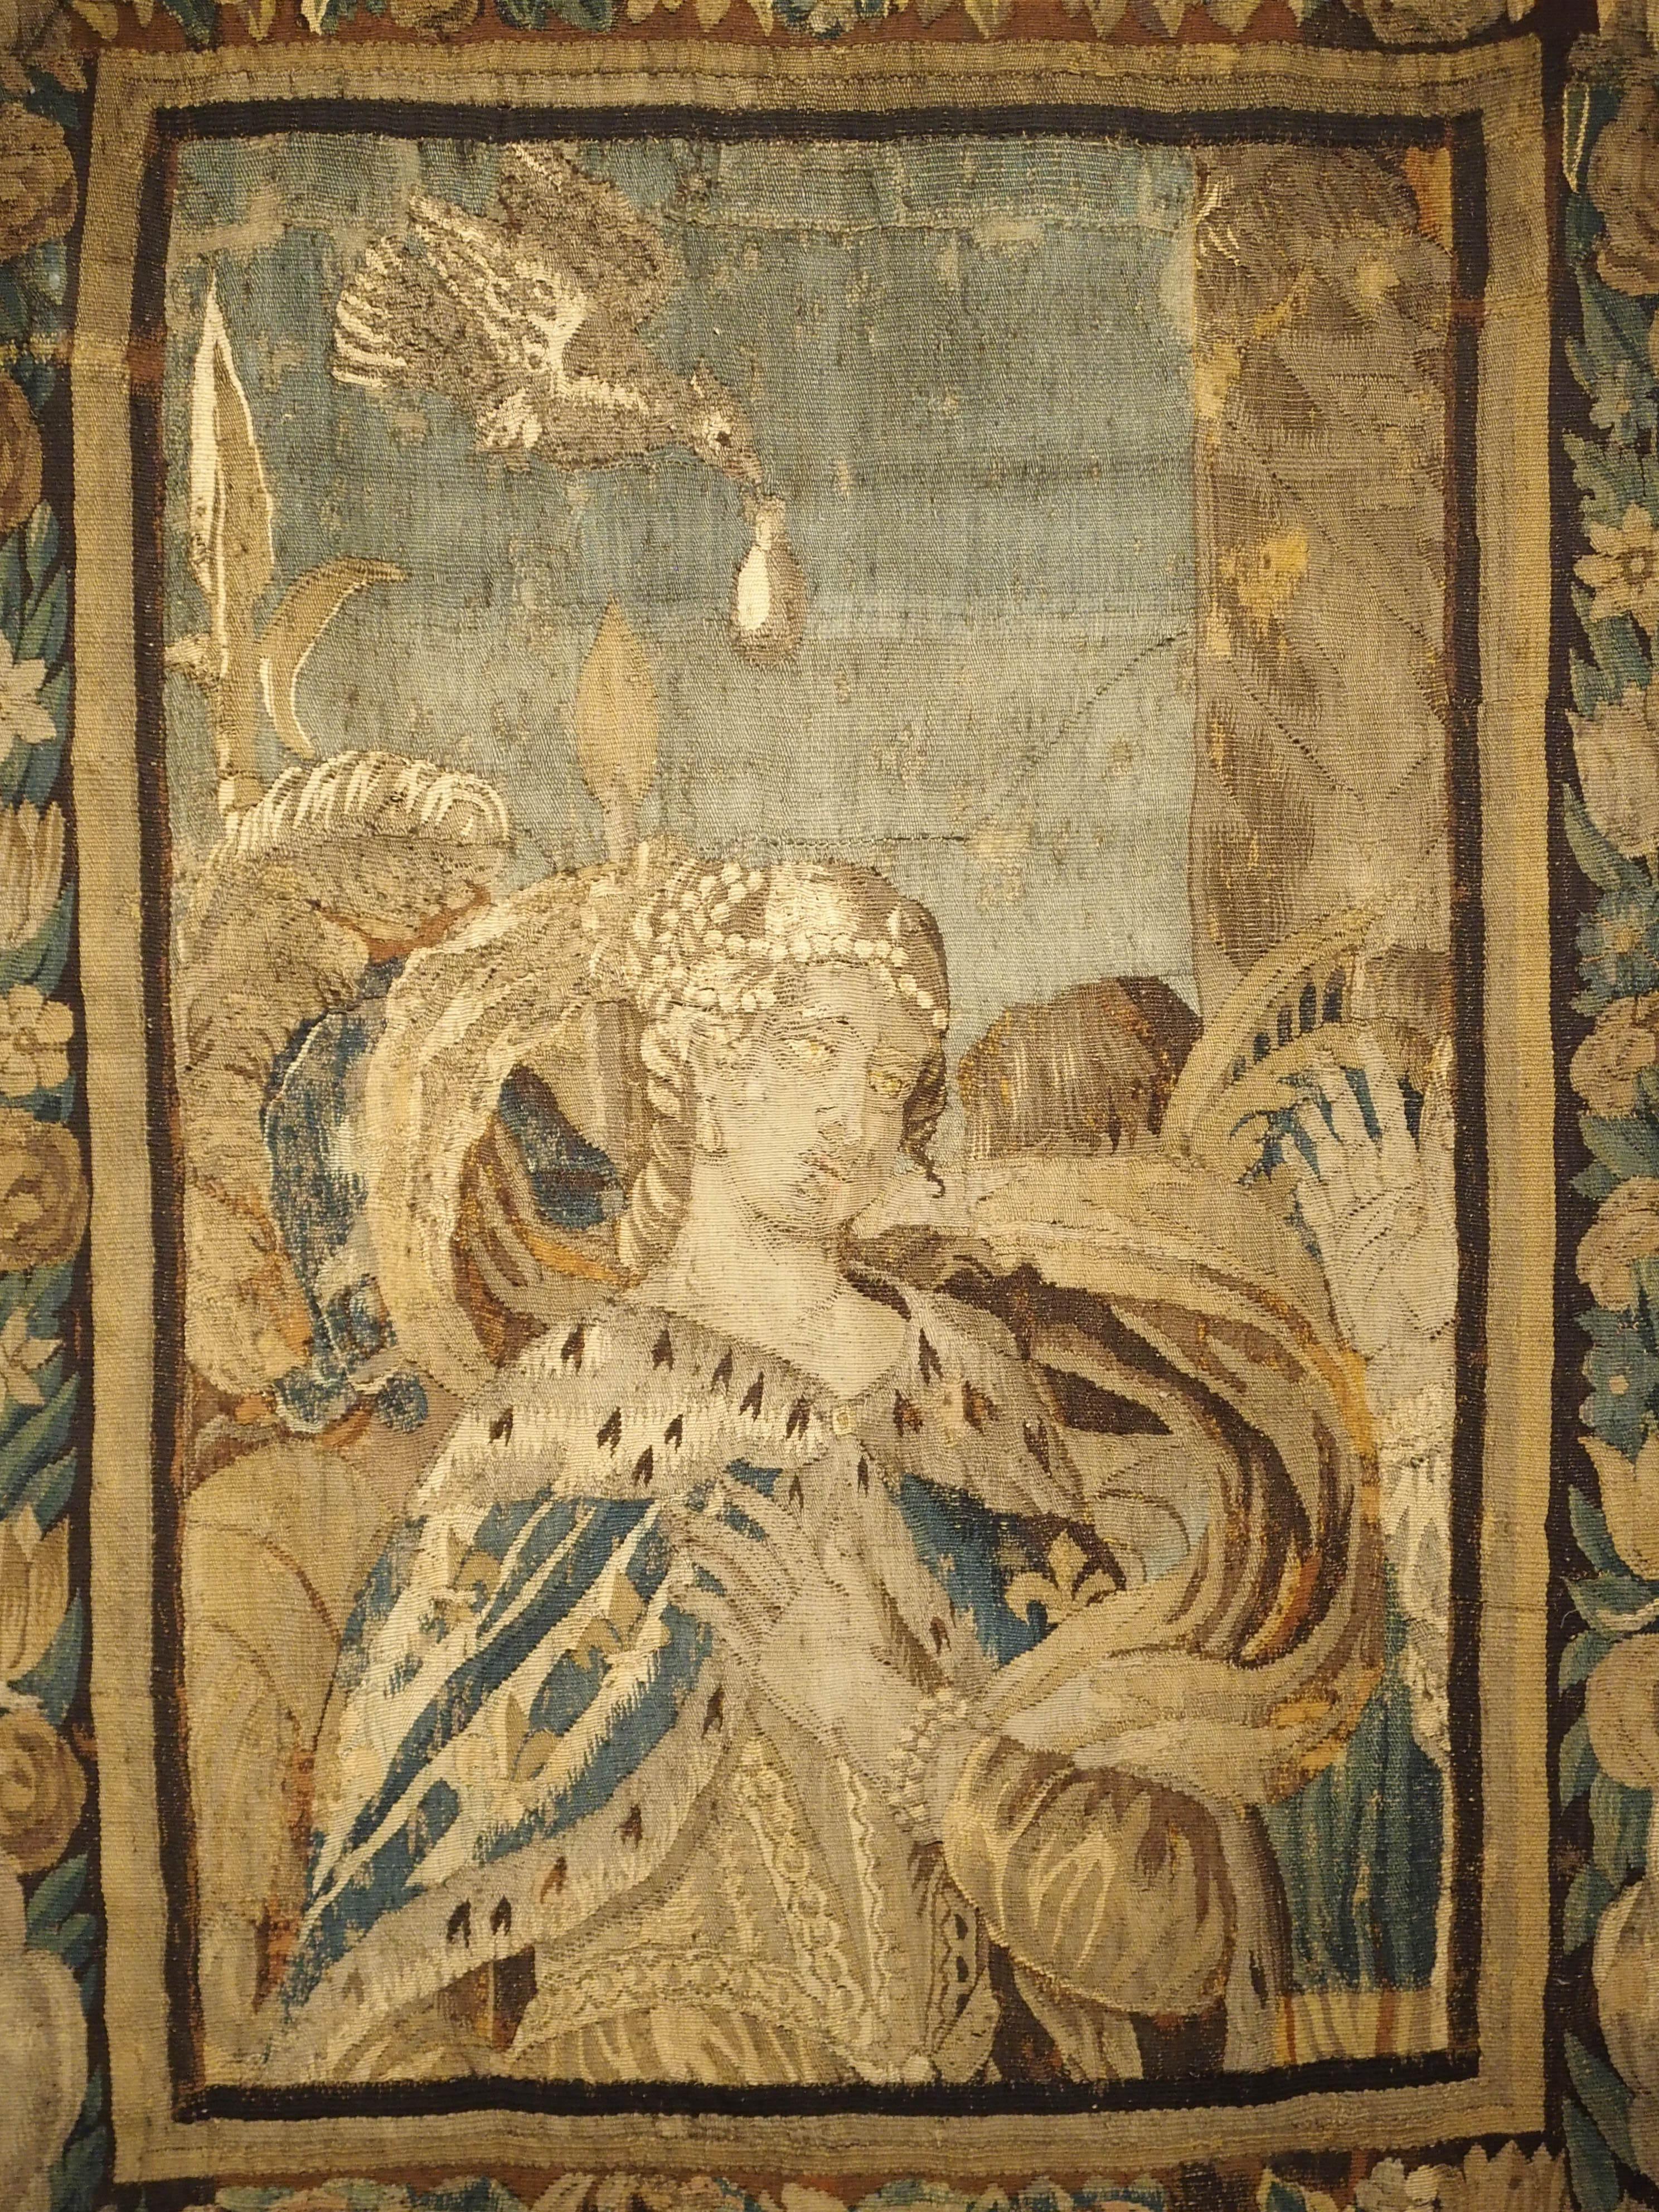 French 17th Century Tapestry Fragment with Ornate Border